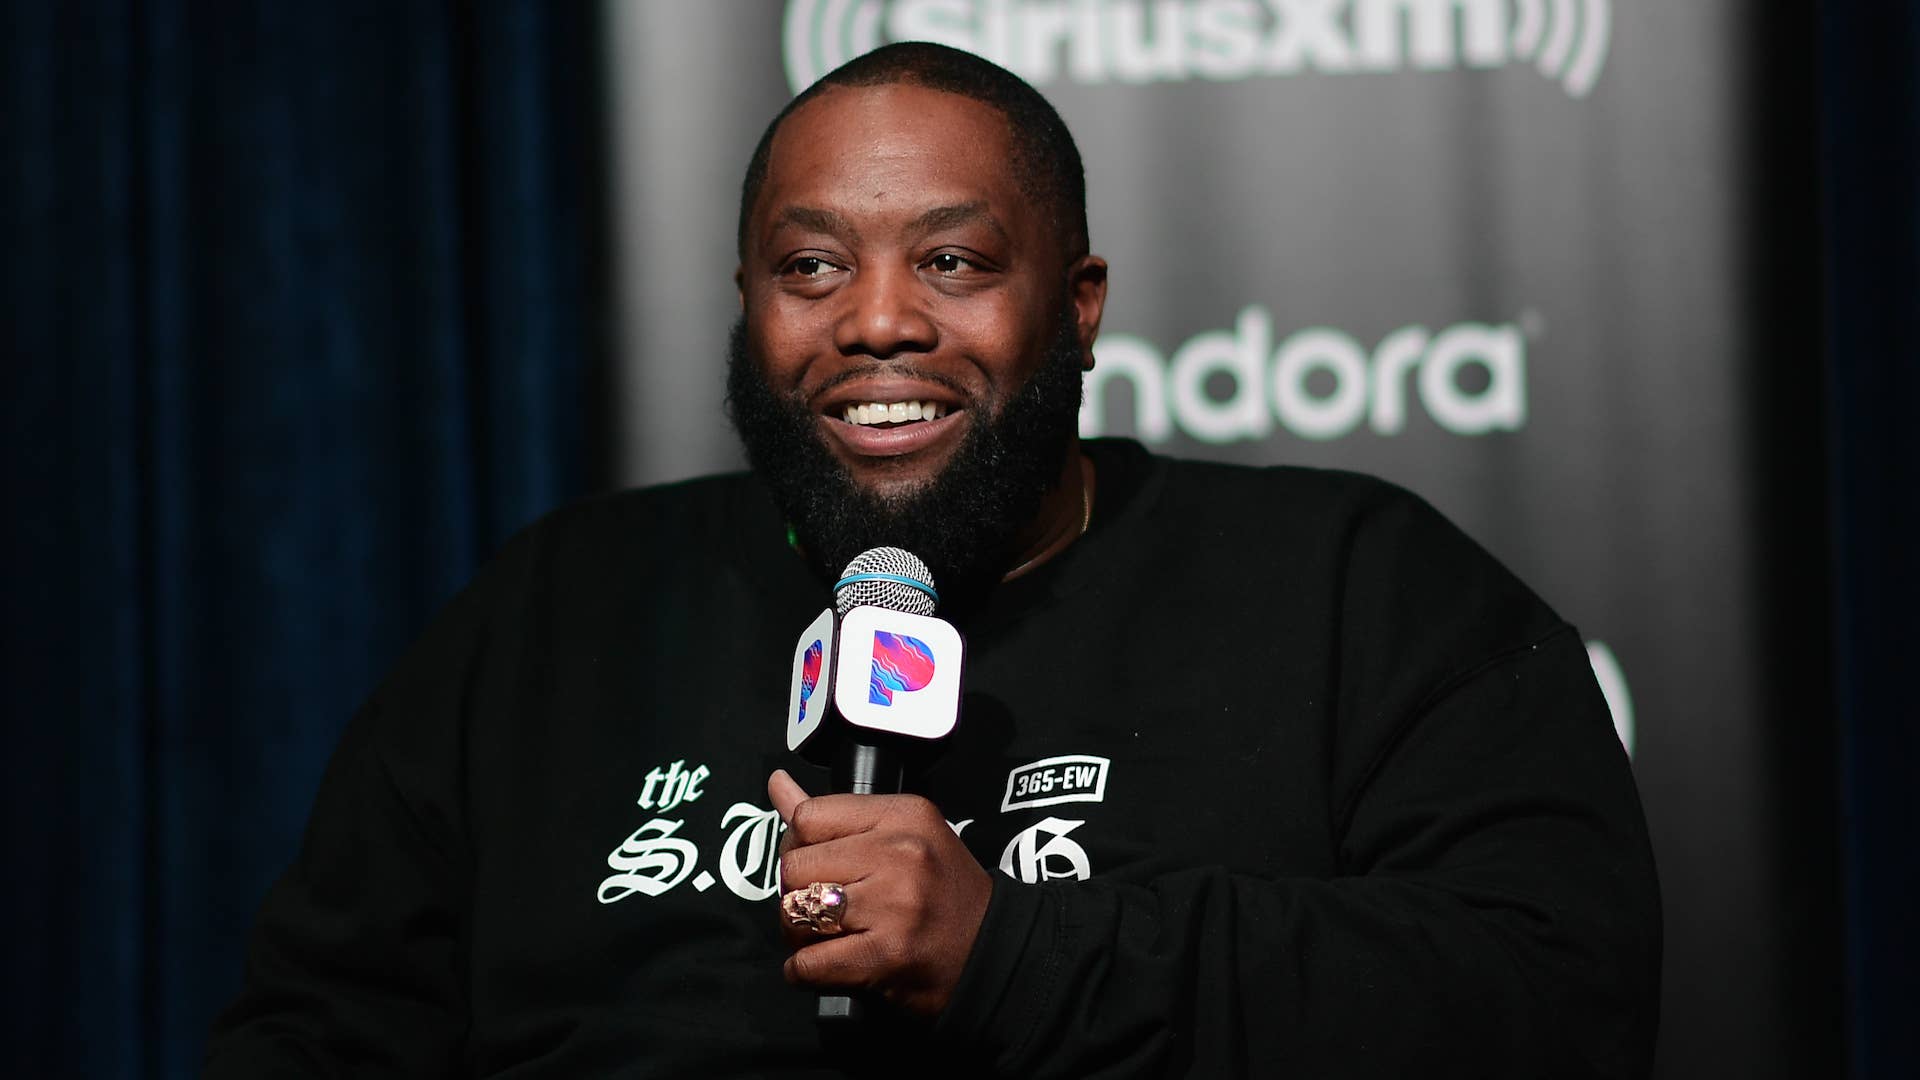 Killer Mike attends "Storytime with Legendary Jerry"